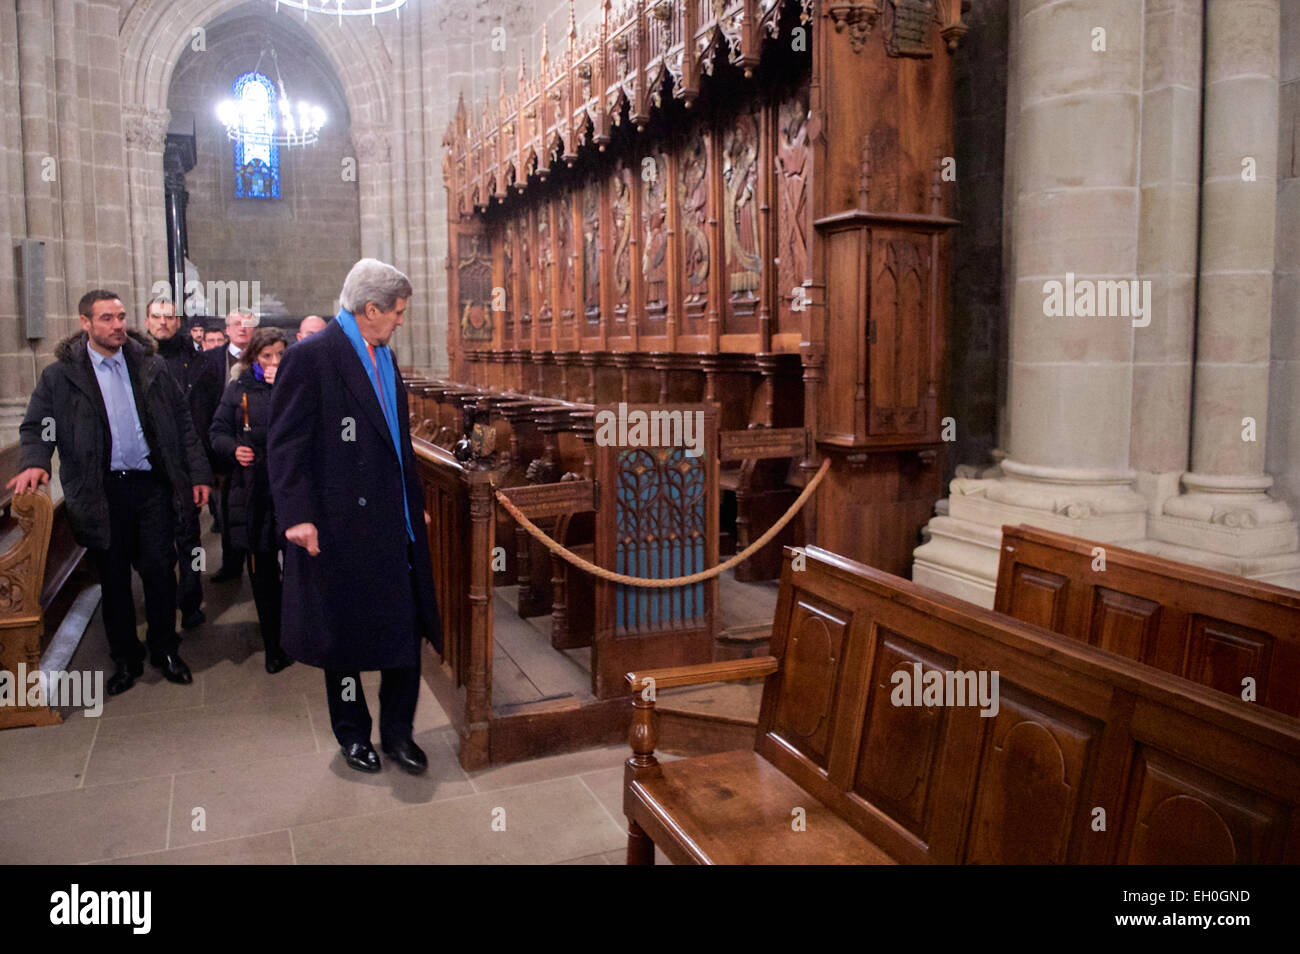 U.S. Secretary of State John Kerry looks out at benches in St. Pierre Cathedral in Geneva, Switzerland, the adopted home church of Protestant Reformation leader John Calvin, during a tour on January 26, 2015. Stock Photo